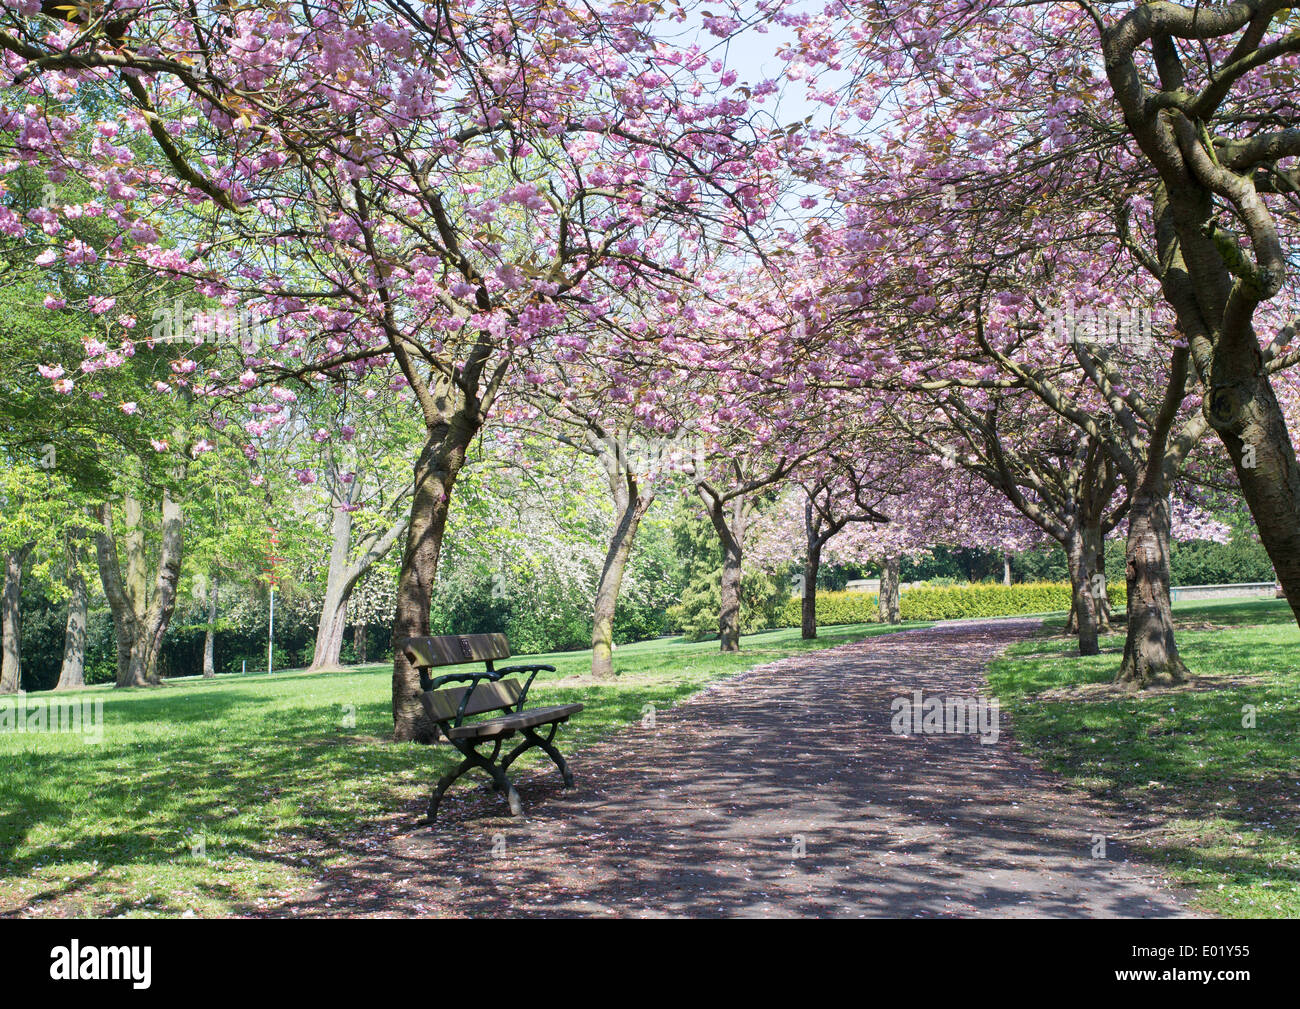 An avenue of flowering cherry trees in April, Saltwell Park Gateshead north east England UK Stock Photo